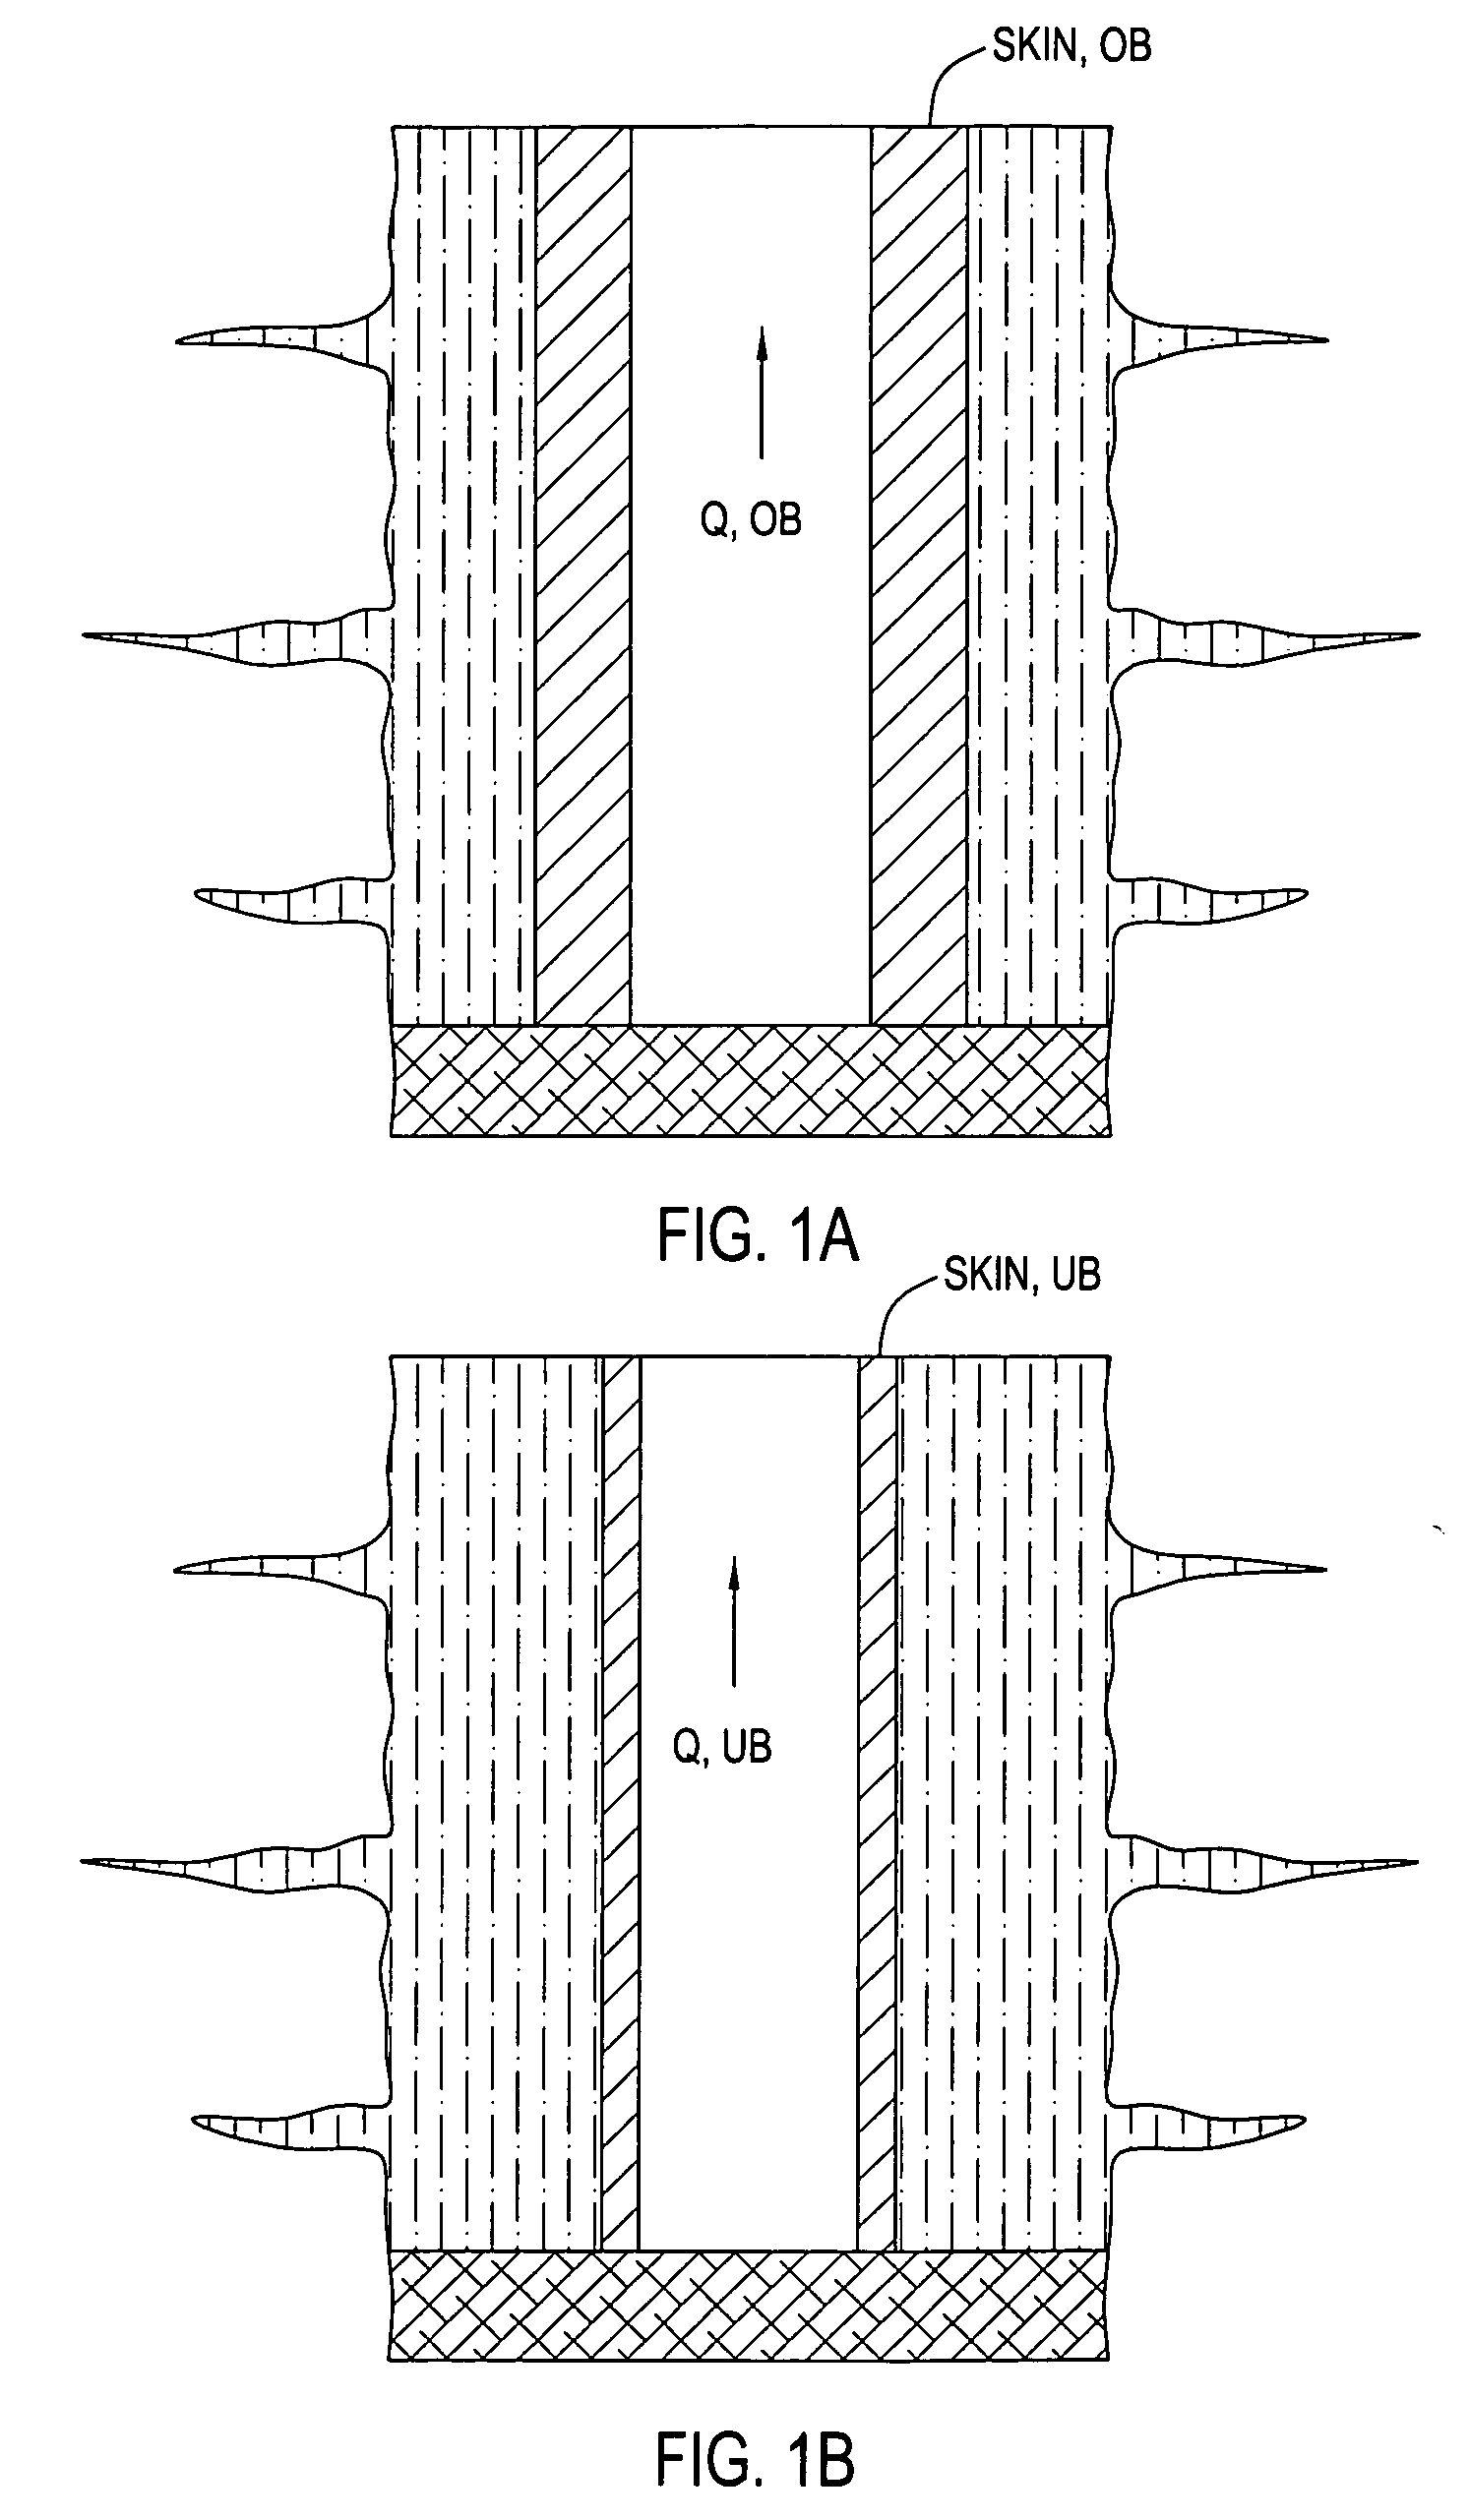 System for evaluating over and underbalanced drilling operations